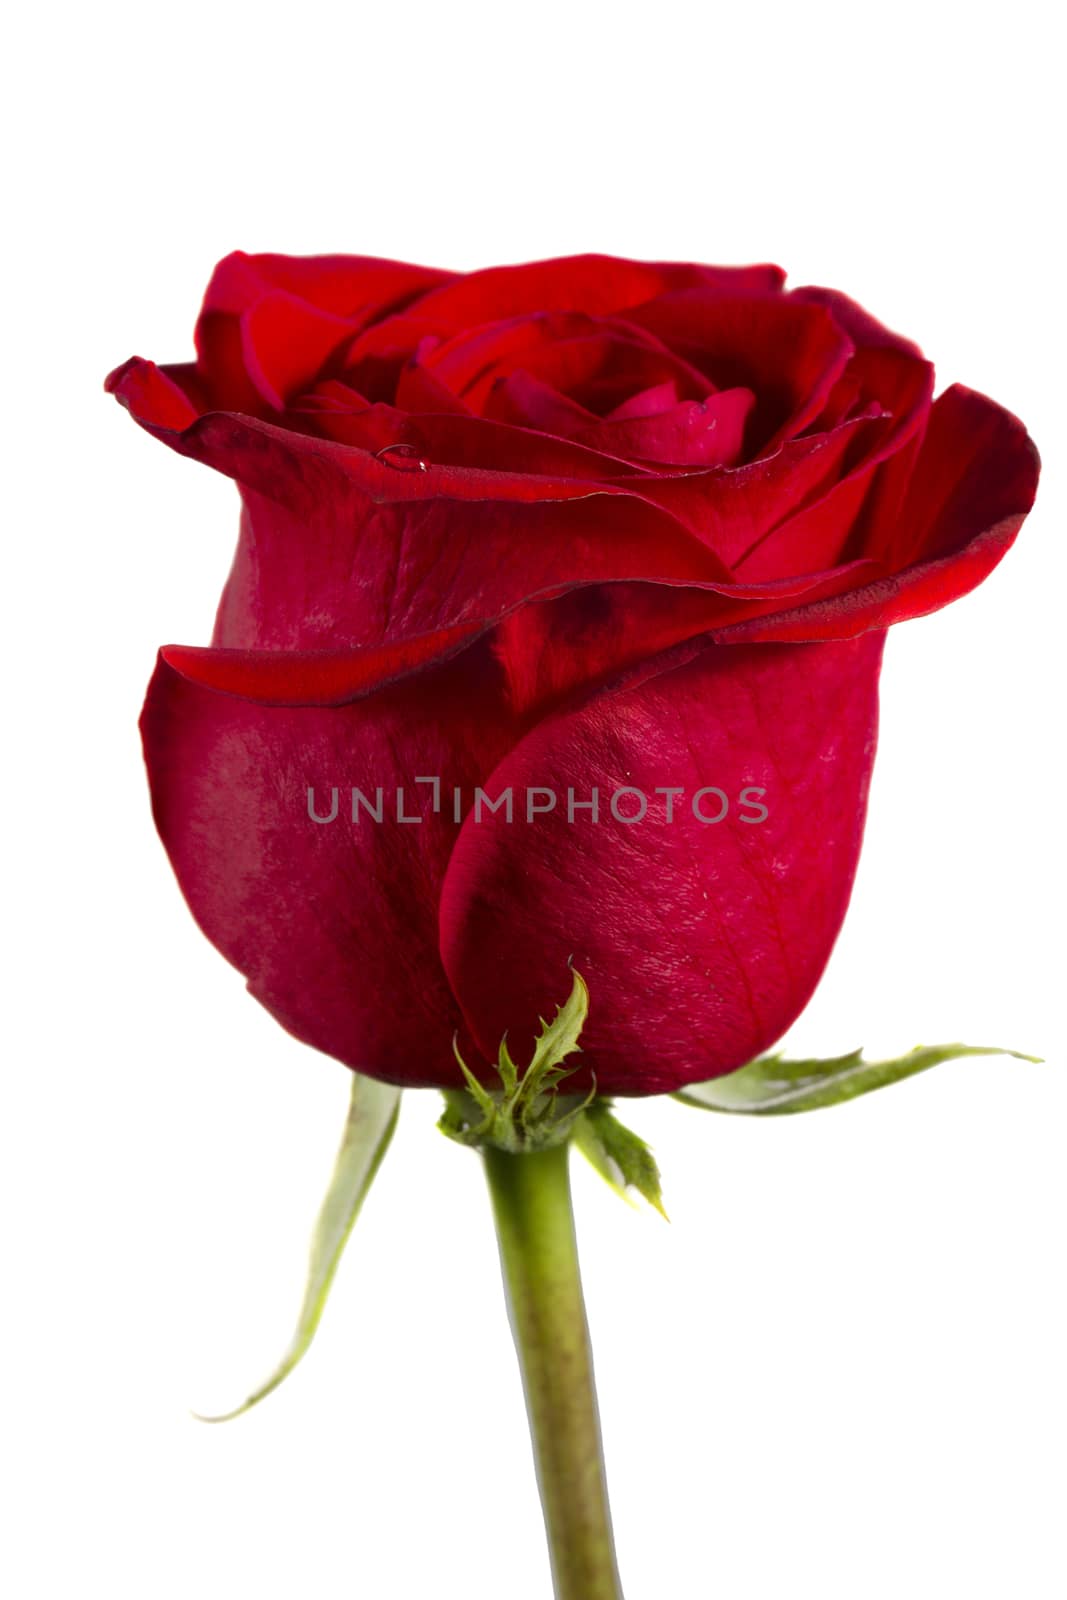 Single red rose isolated on white